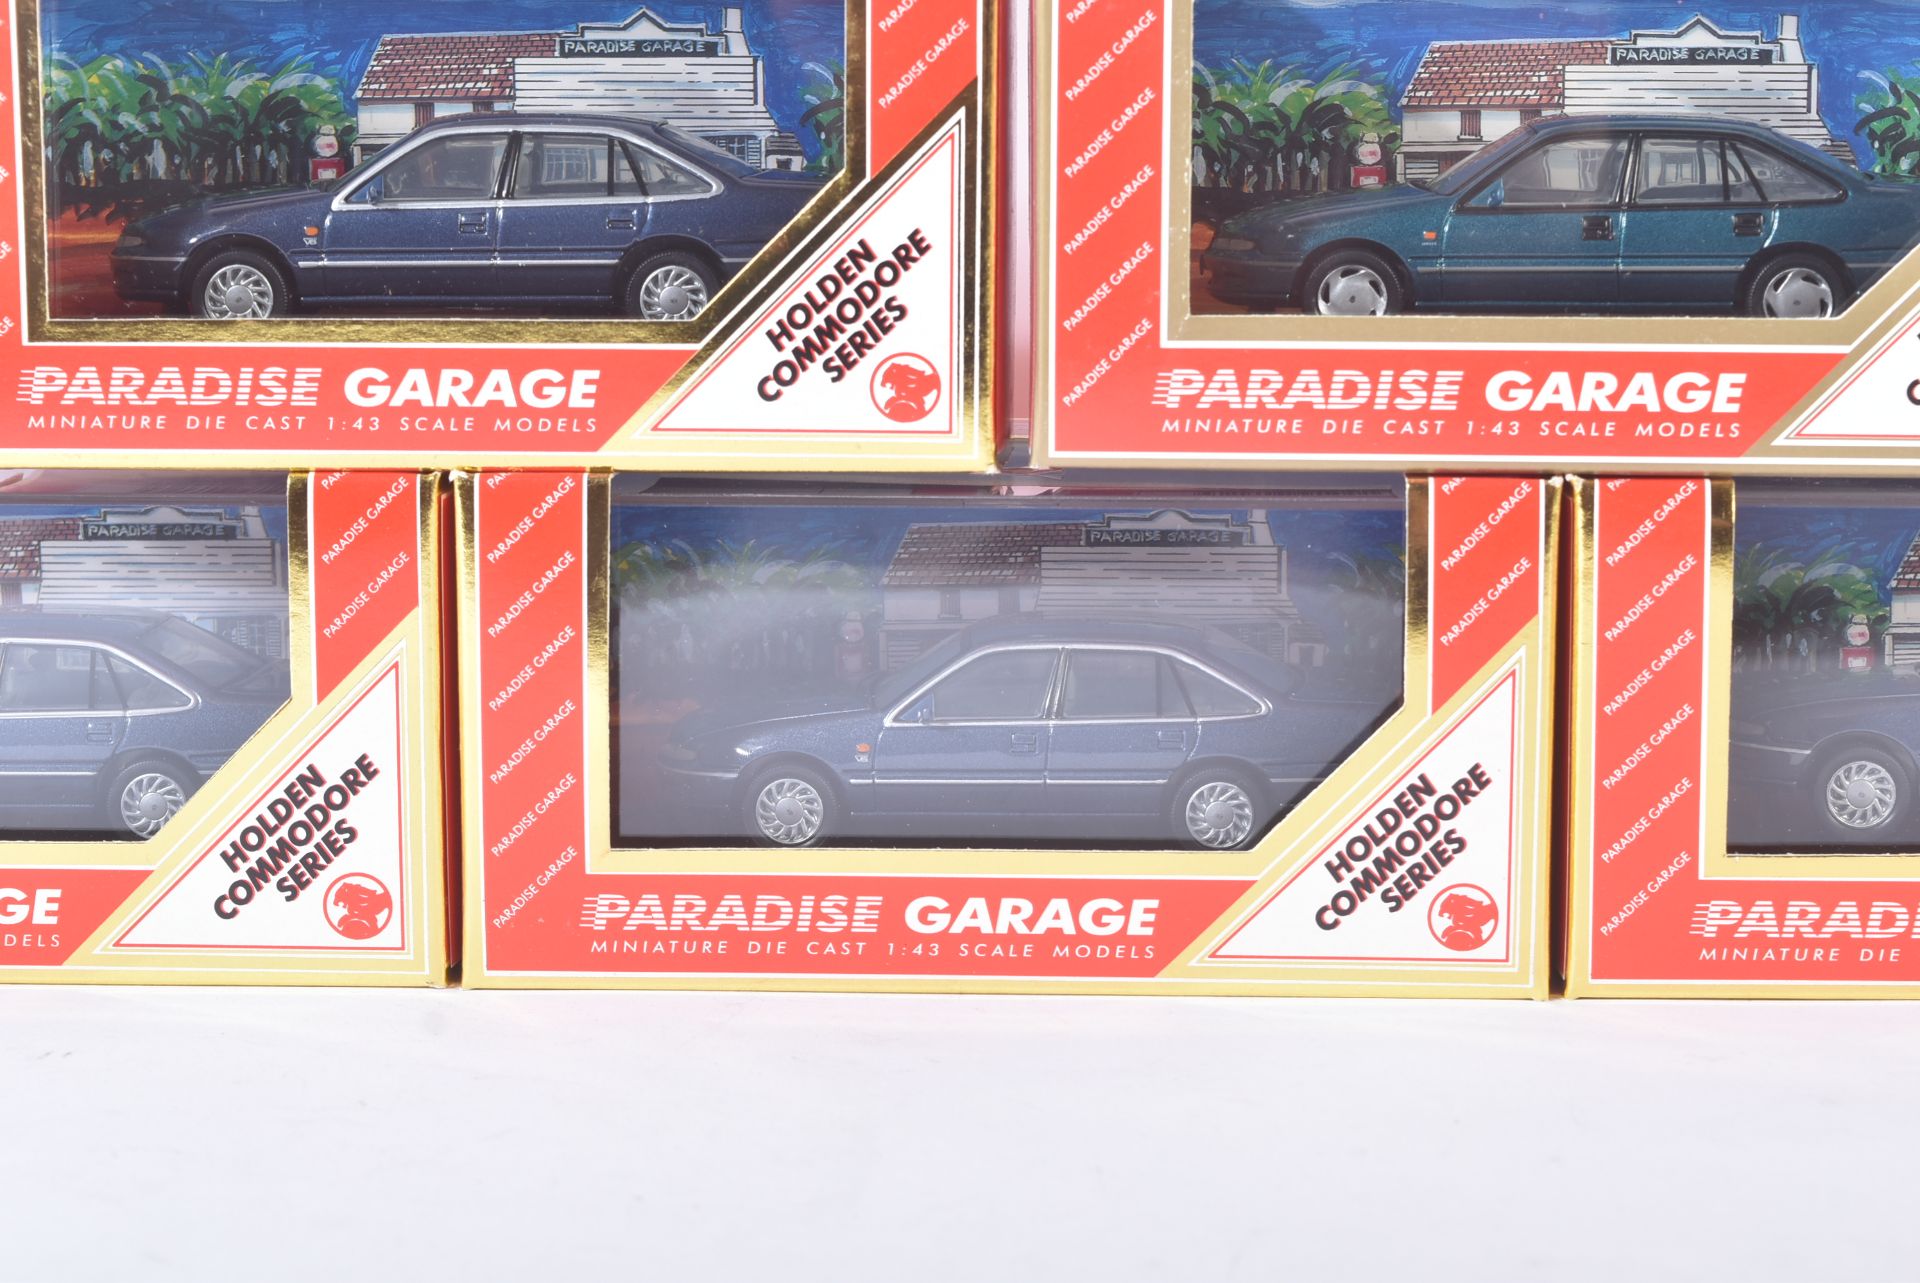 PARADISE GARAGE - 1/43 SCALE PRECISION DIECAST MODELS - Image 5 of 5